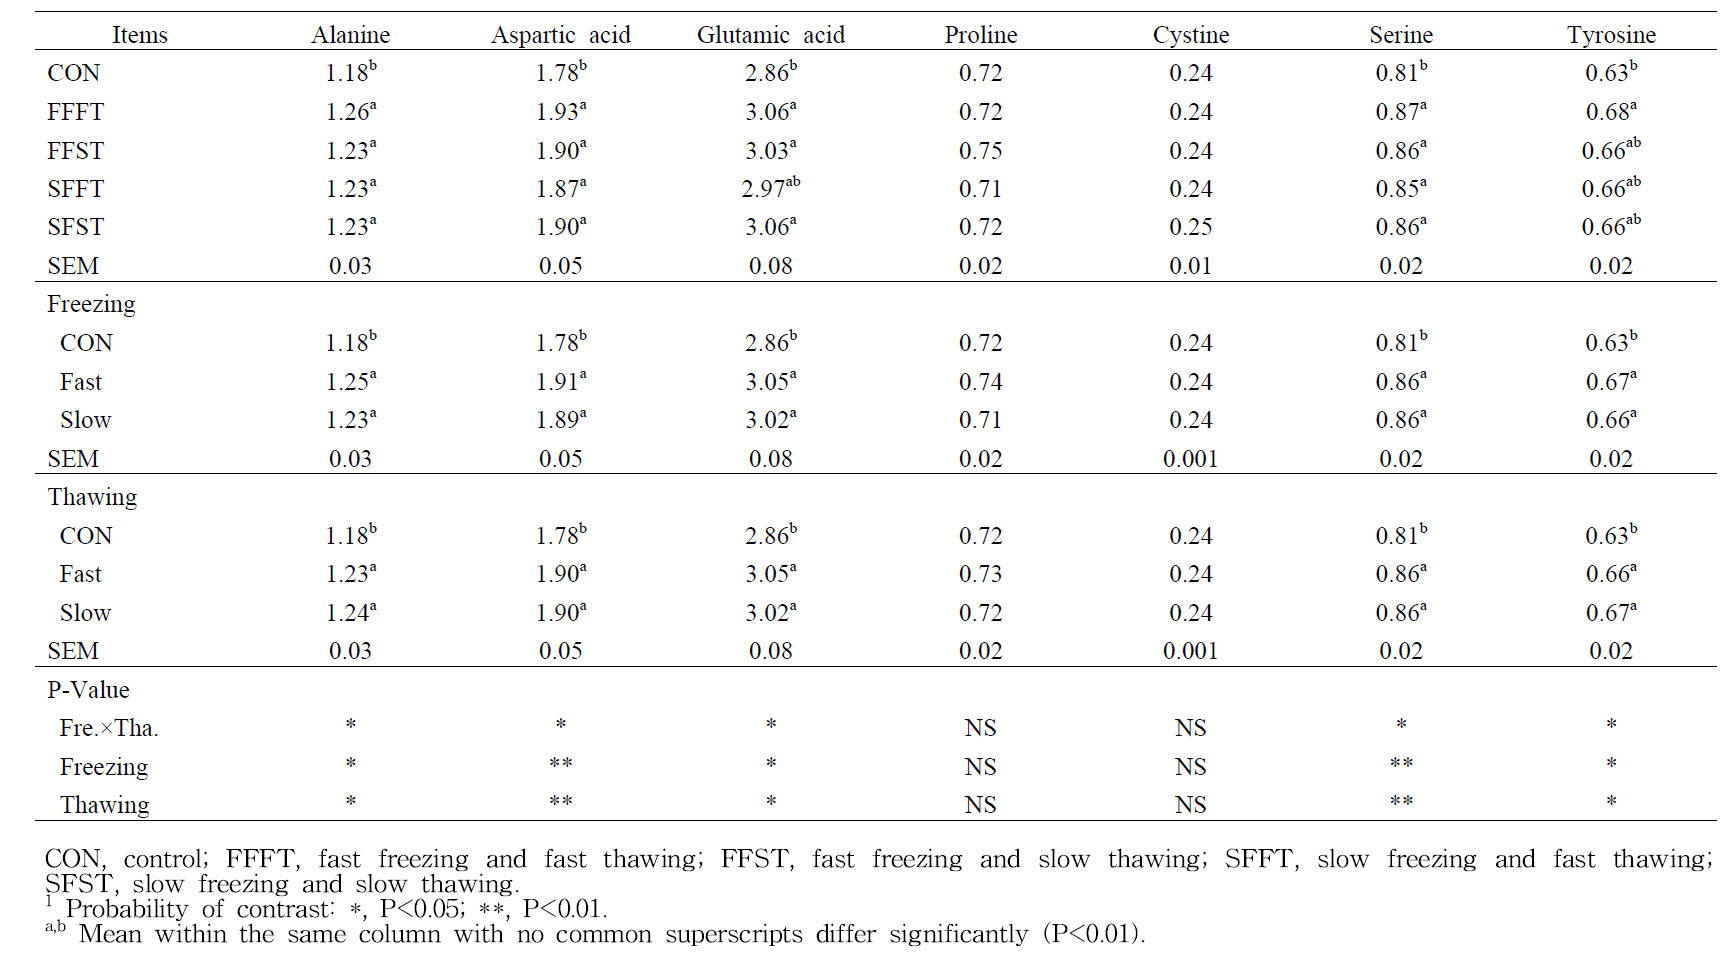 Effects of freezing and thawing methods on non-essential amino acid composition of duck meats